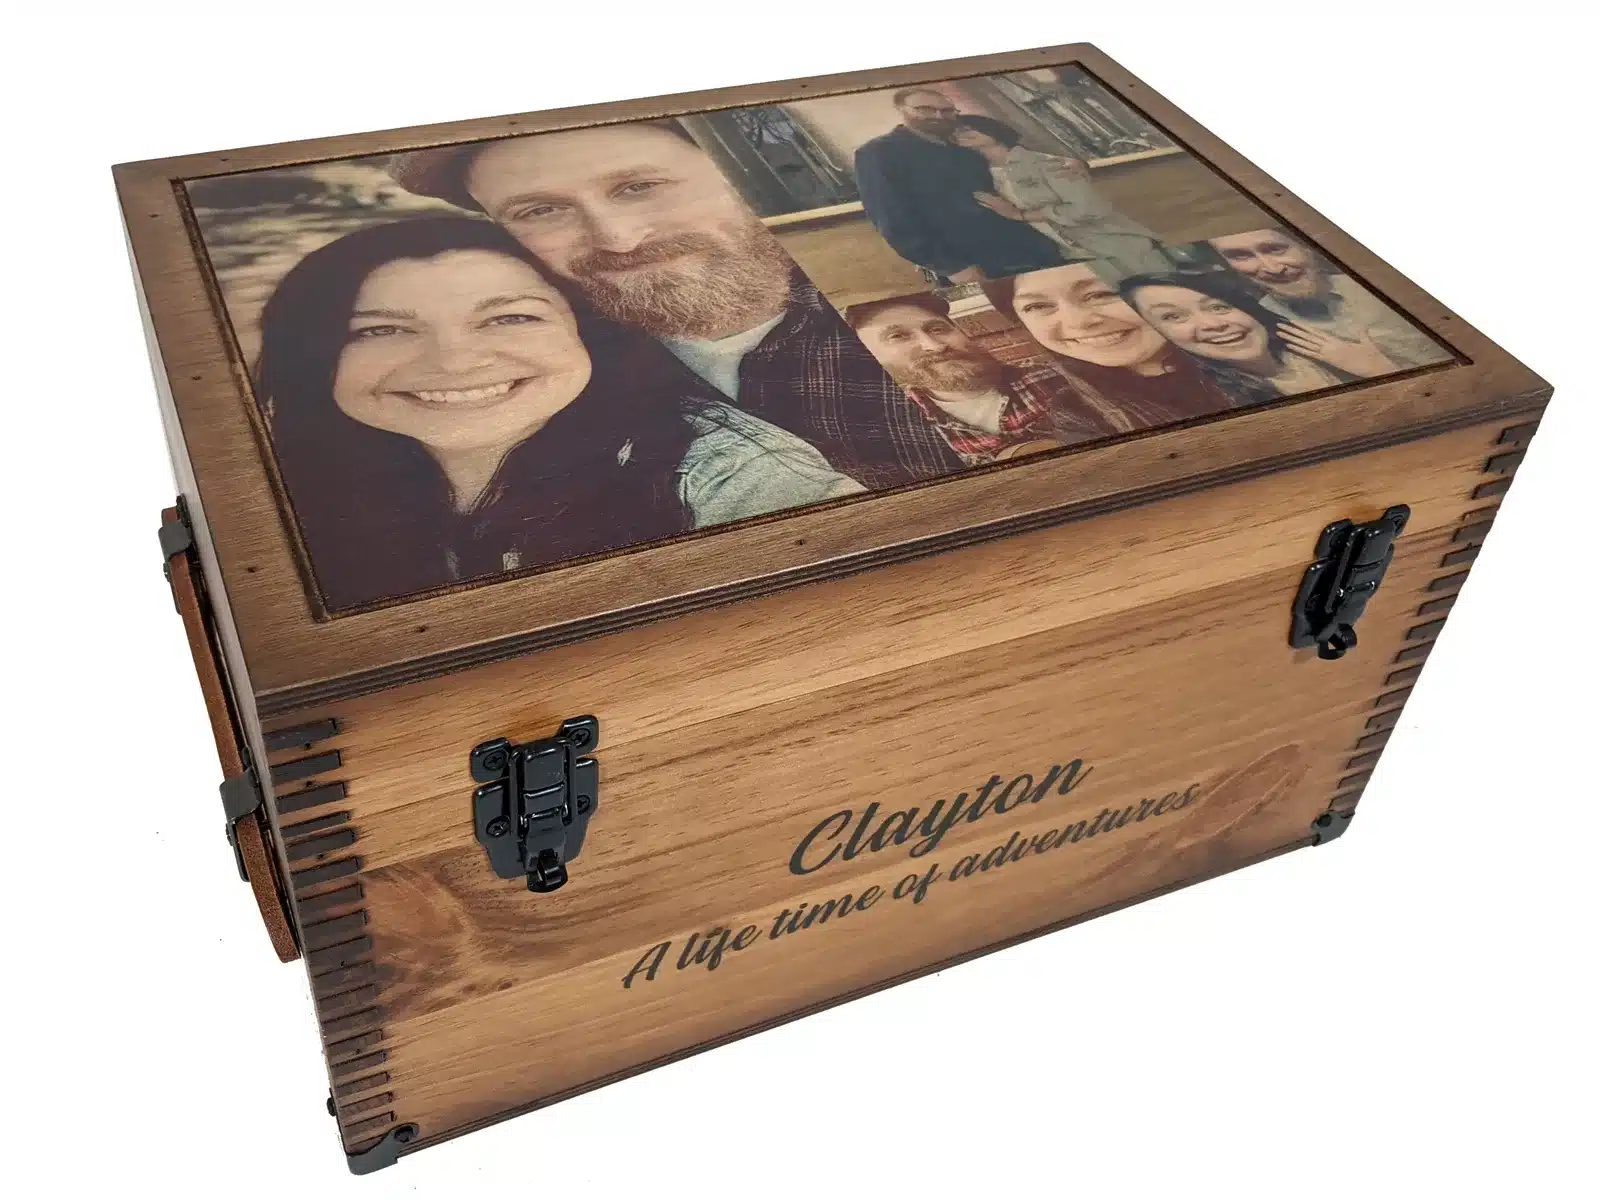 Small hardwood custom wooden boxes for presentation and gifts, personal or  corporate